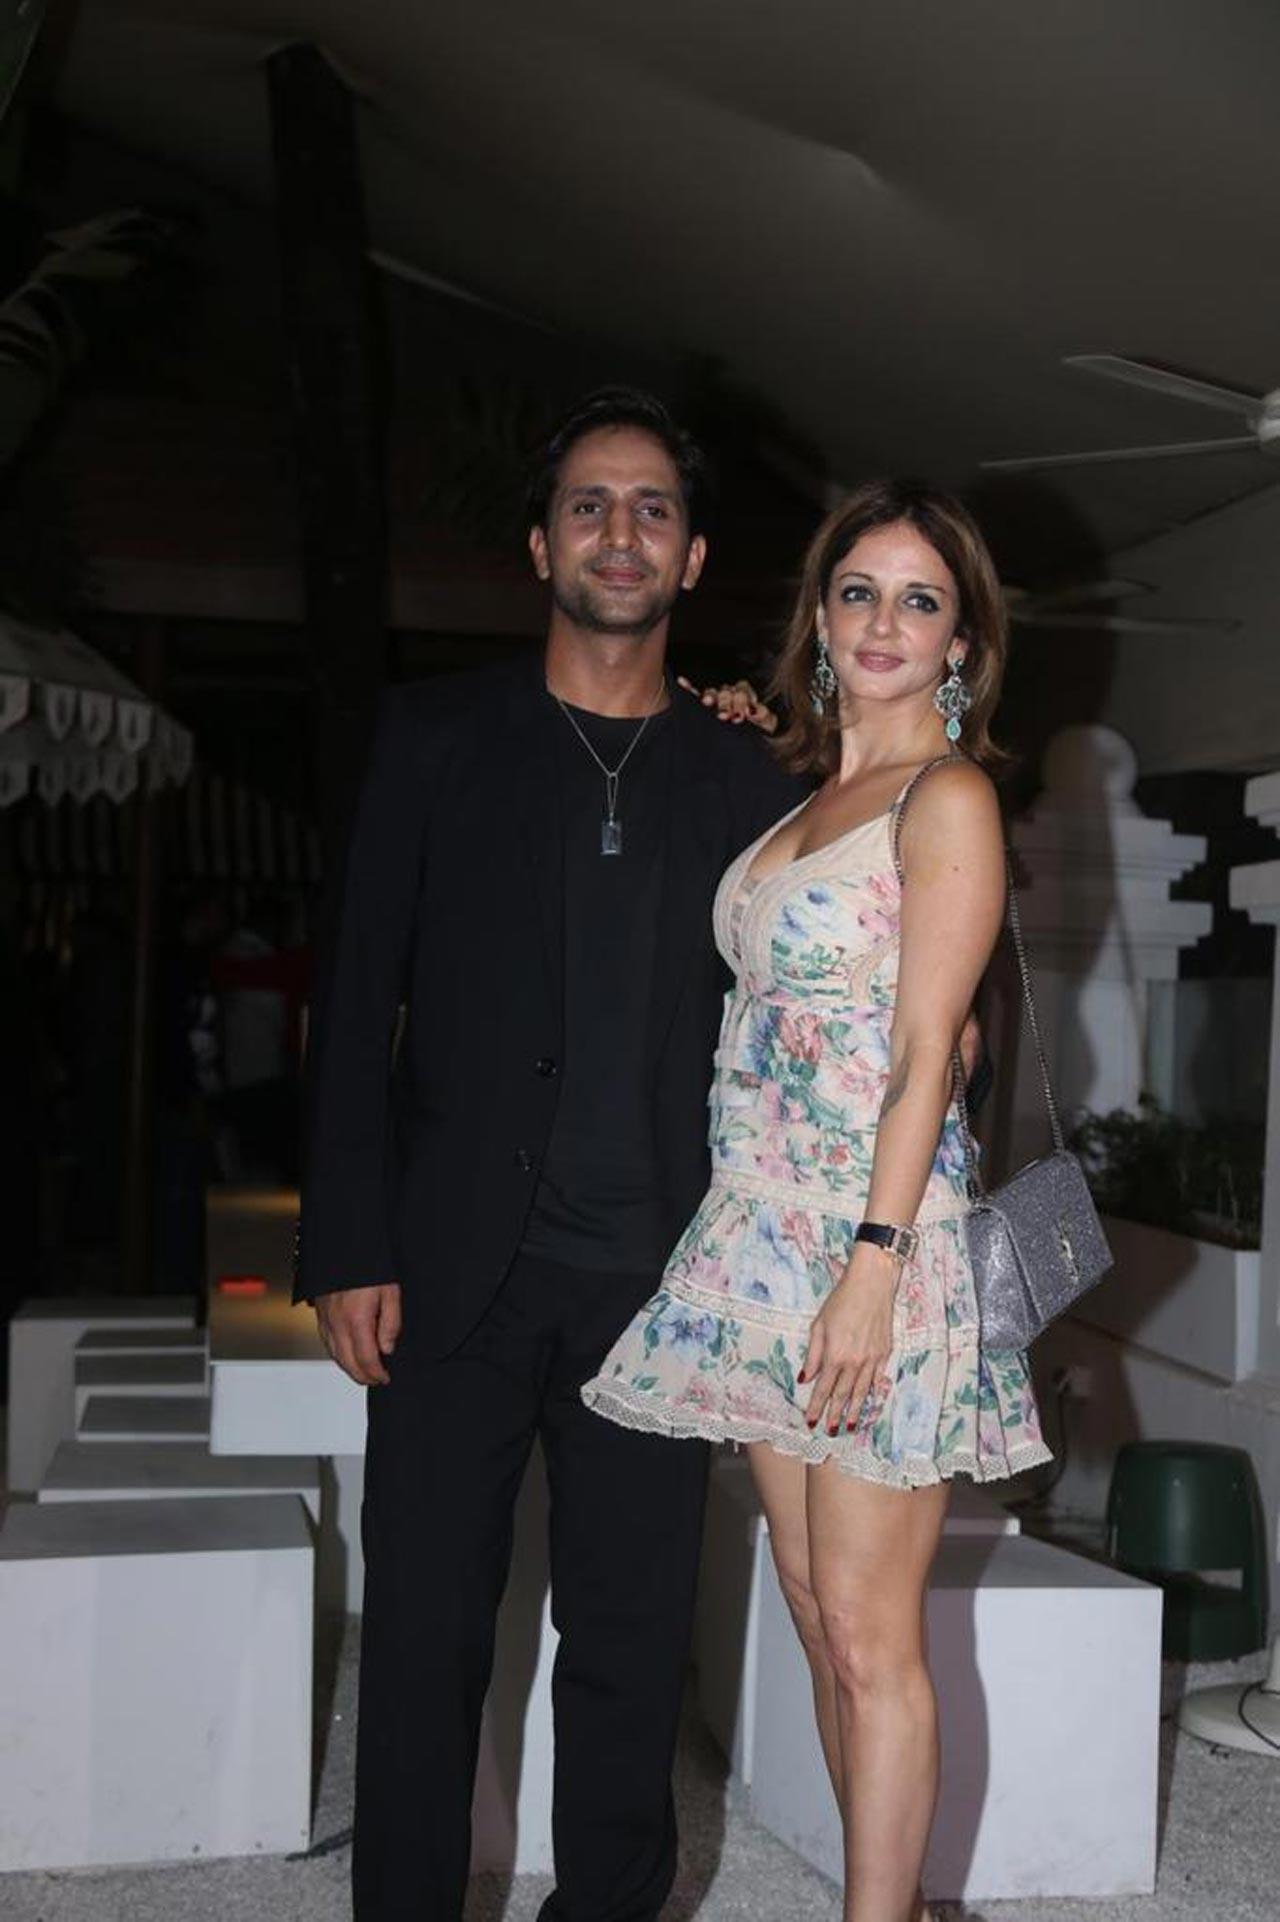 In the pictures, Arjun could be seen standing close to her wife Carla with closed eyes. The singer donned an off-white sherwani from designer Anita Dongre. Carla, on the other hand, opted for a beautiful red Sabyasachi lehenga and heavy jewellery